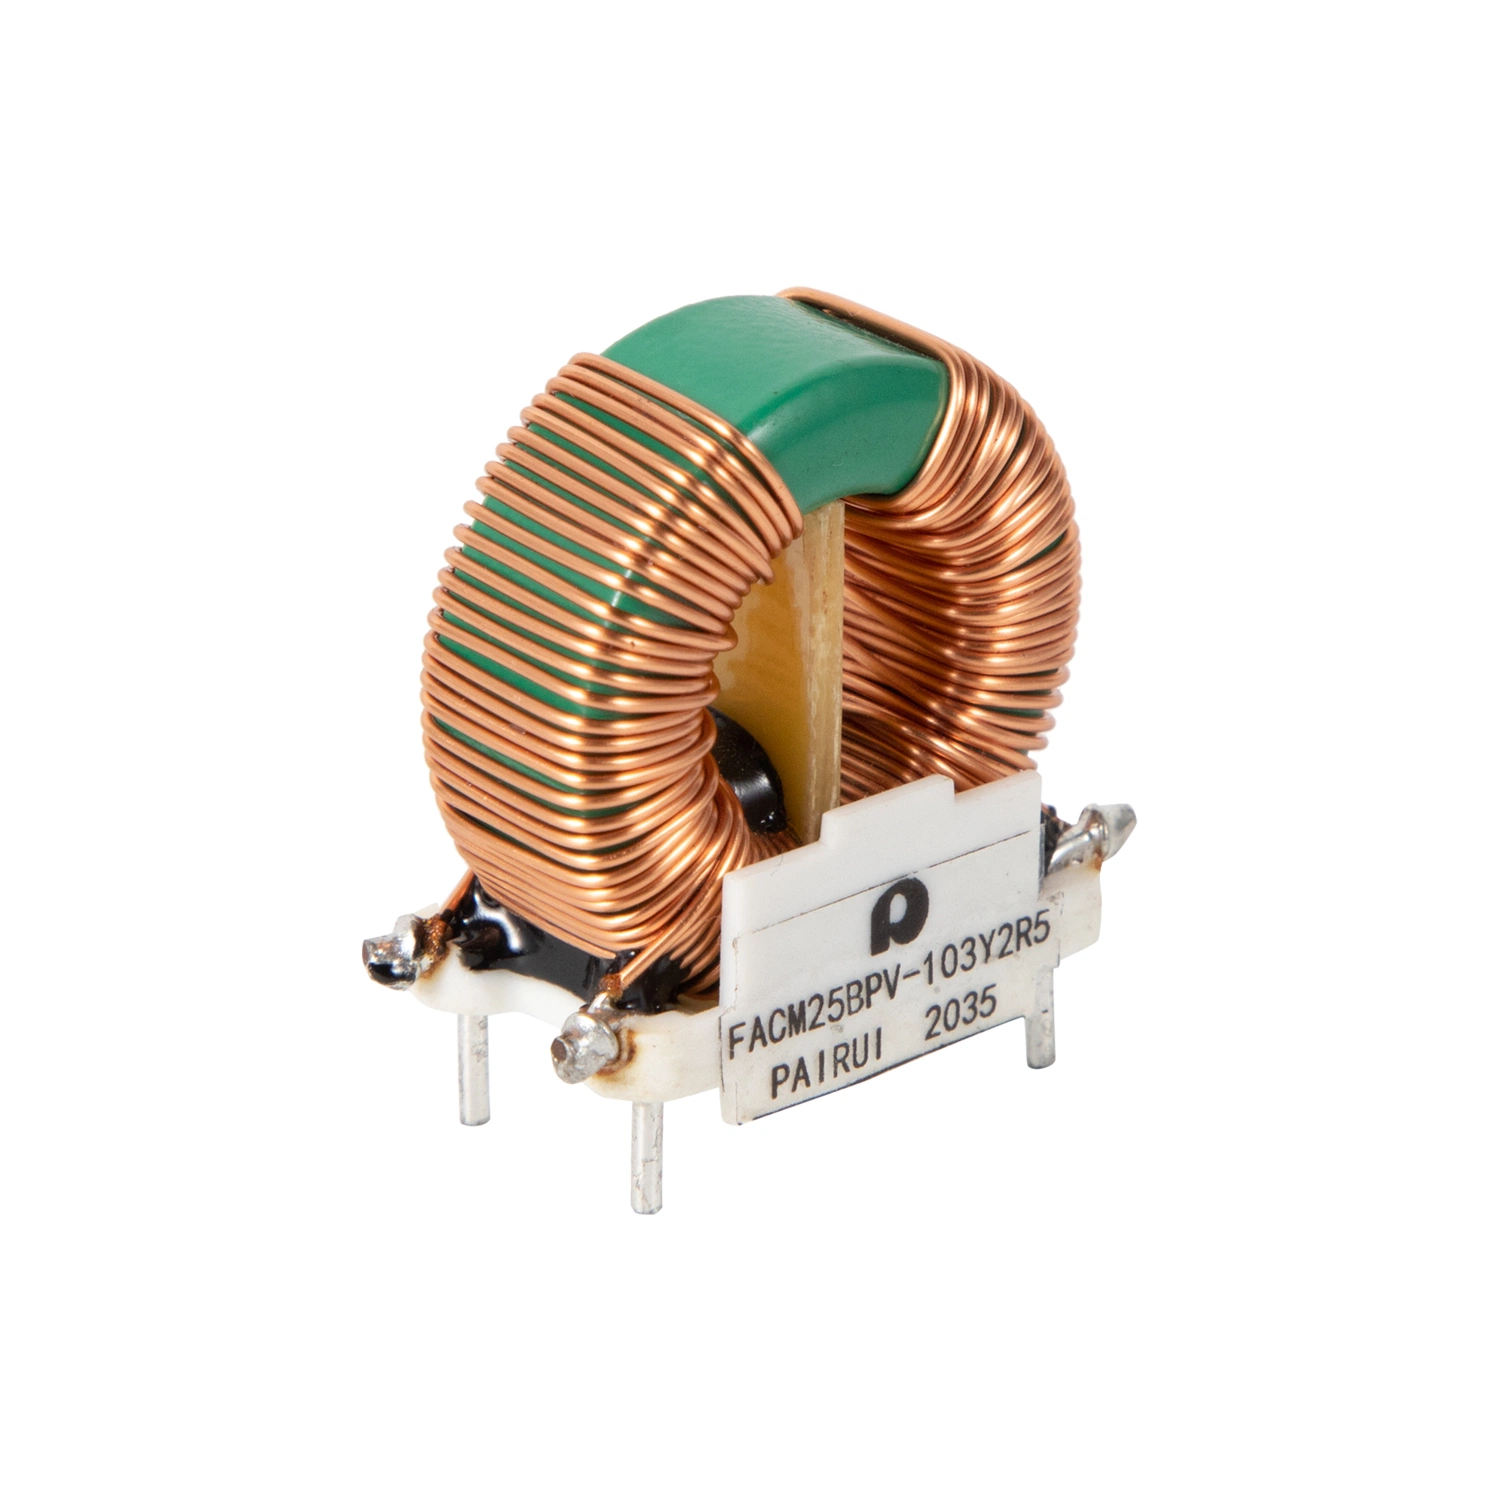 Consumer Electronics/Intelligent Meter Use Toroidal Inductor Choke Coil (common mode) with RoHS/CE